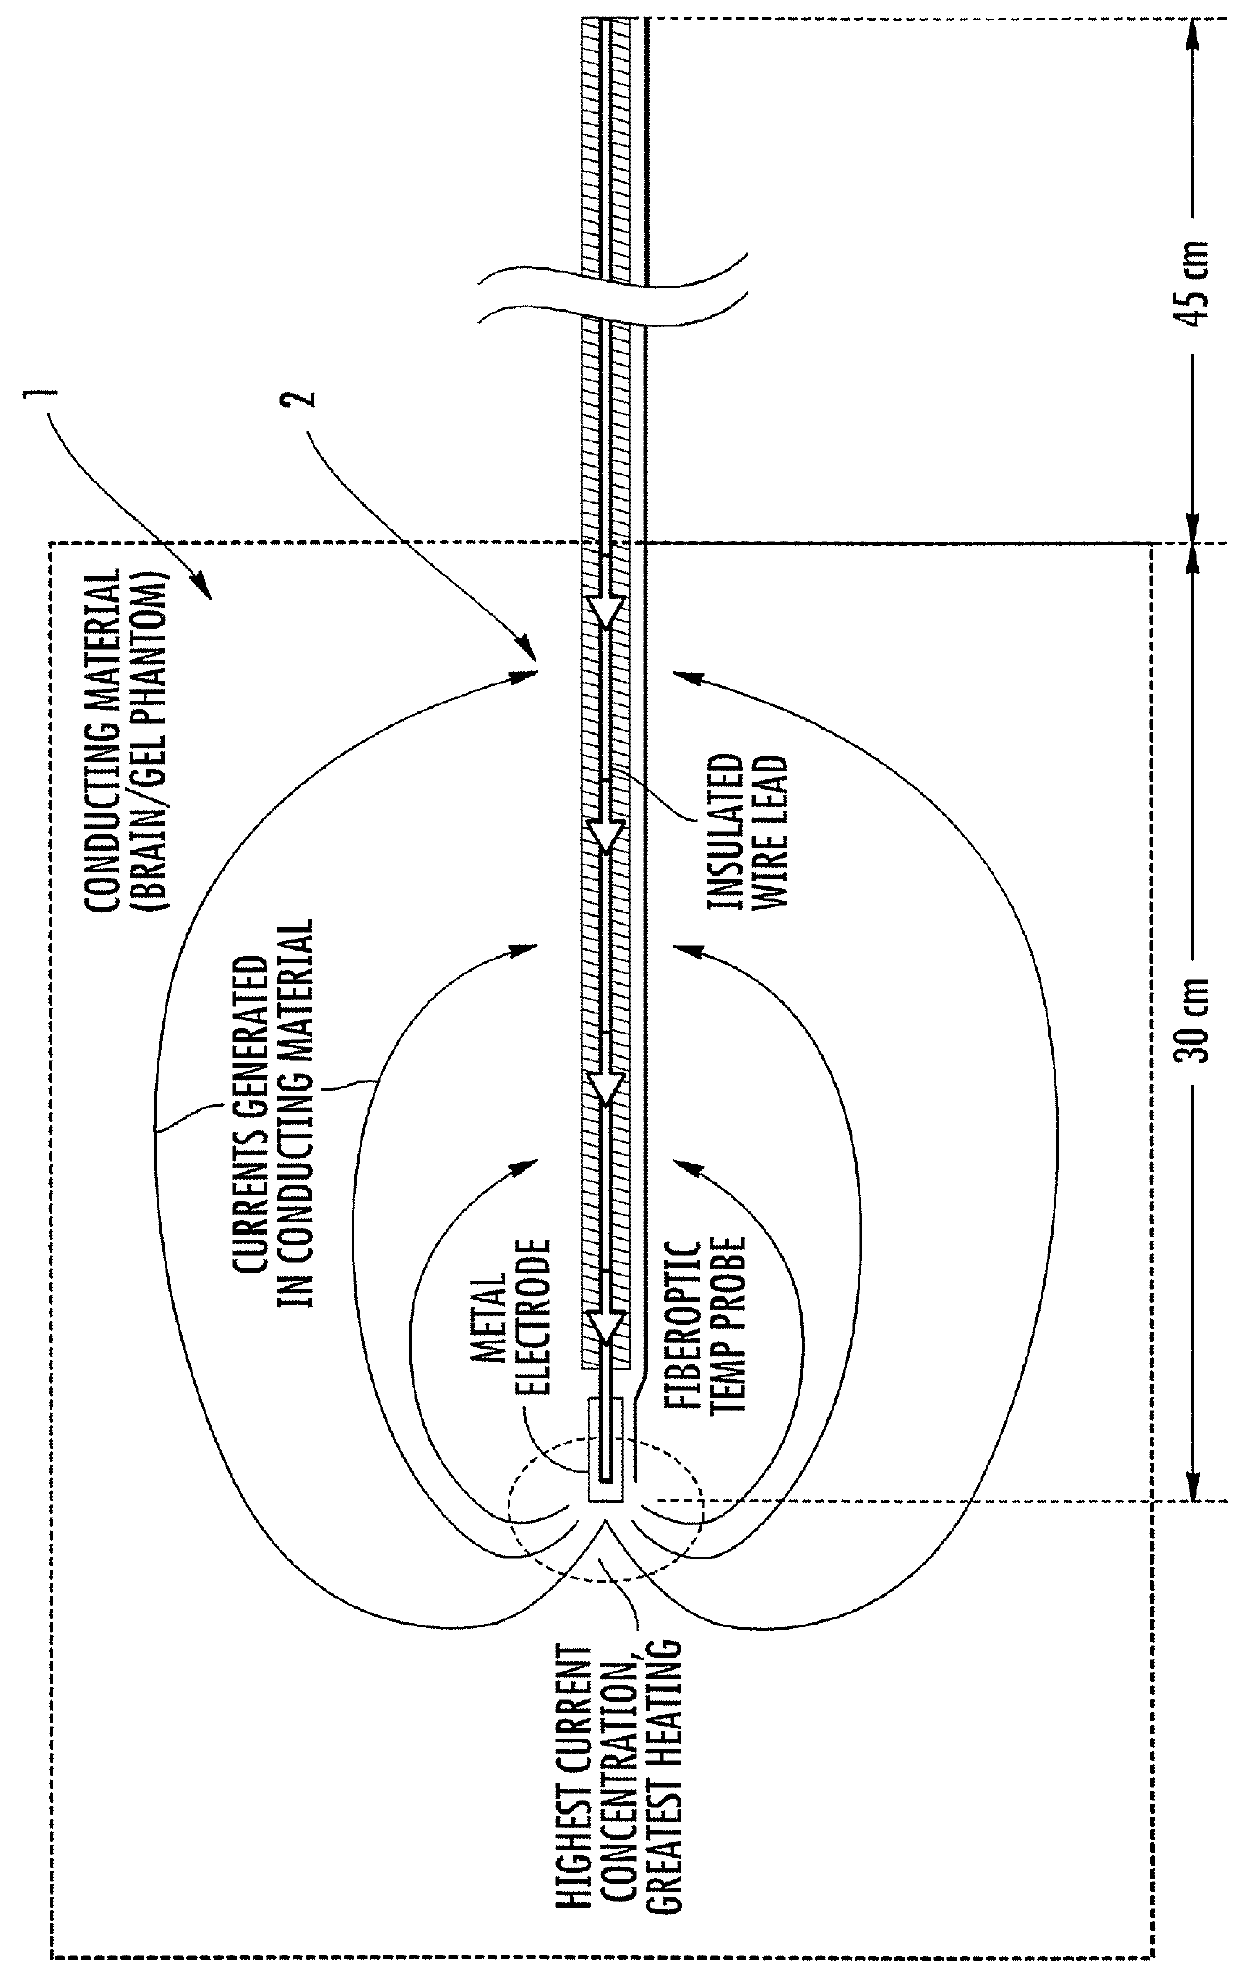 Methods and apparatus for fabricating leads with conductors and related flexible